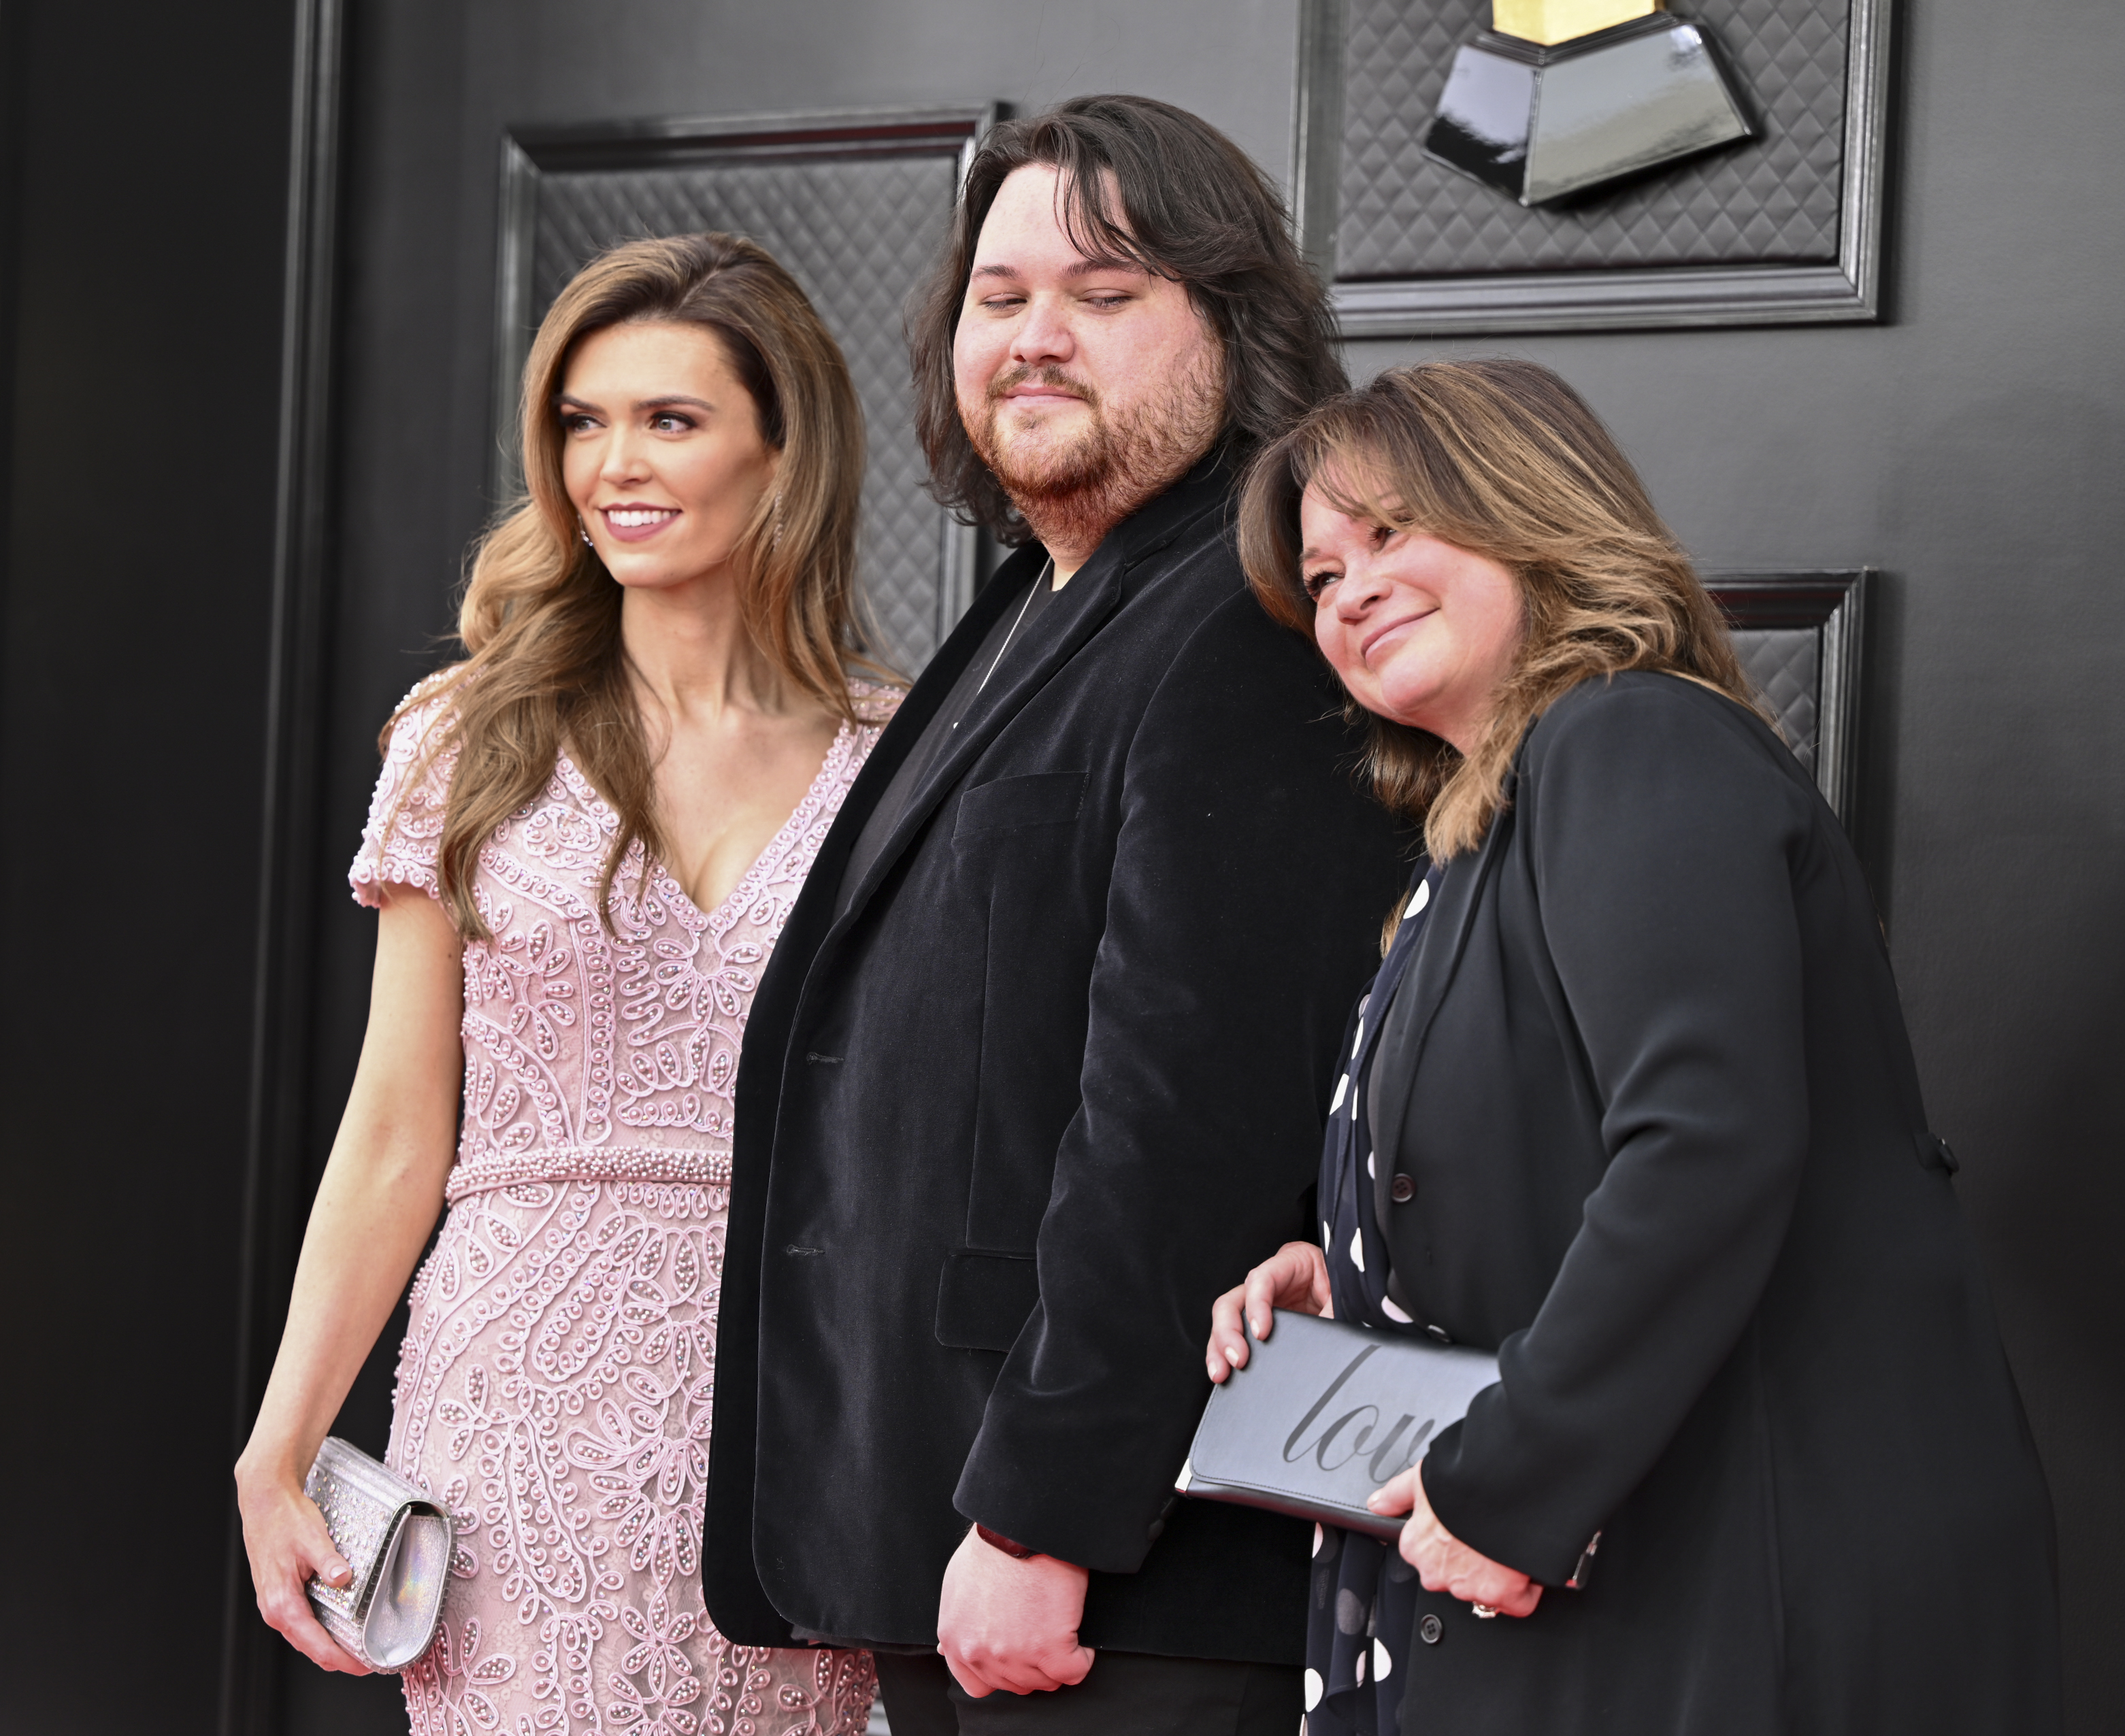 Andraia Allsop, Wolfgang Van Halen, and Valerie Bertinelli at the 64th Annual Grammy Awards in Las Vegas, Nevada on April 3, 2022 | Source: Getty Images